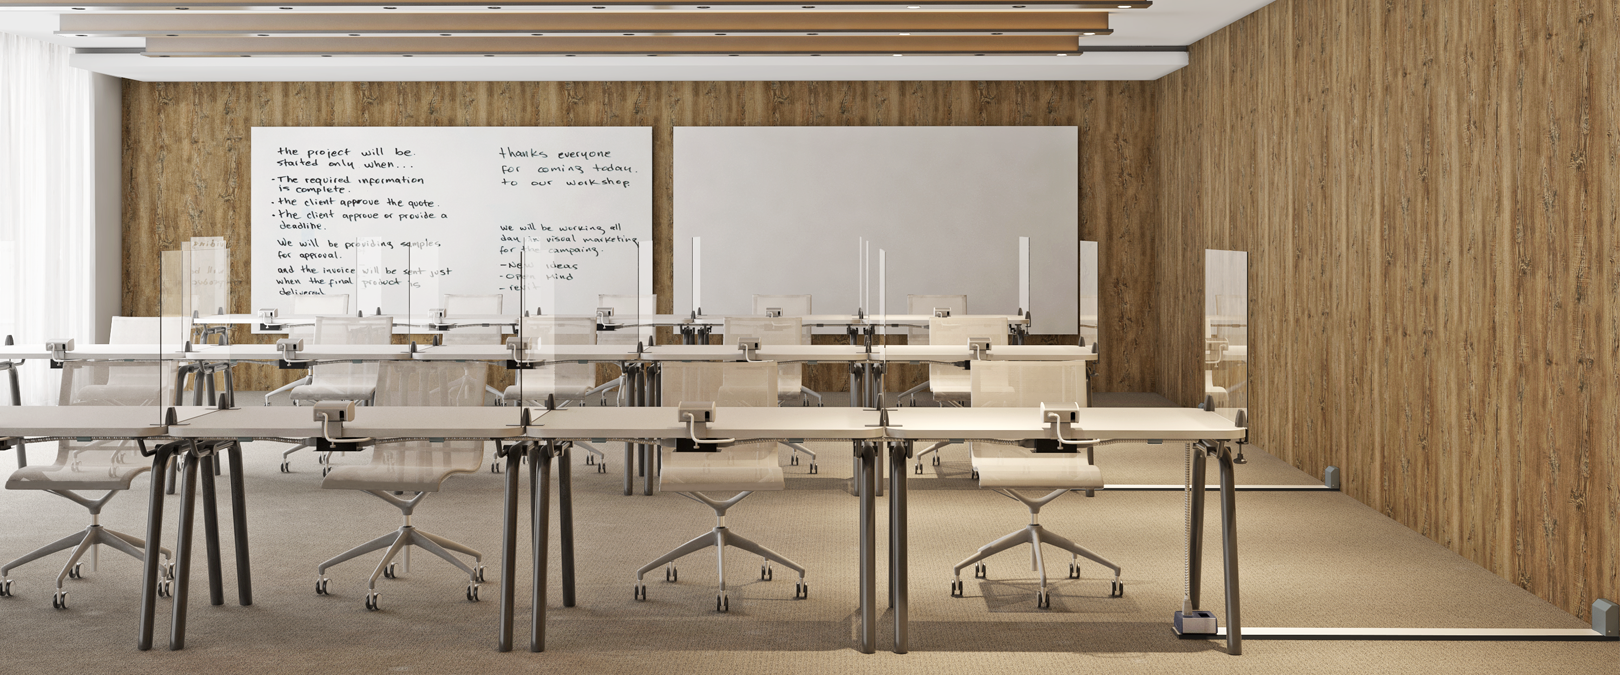 MLS-Classroom-1620x675 Impacts of the Physical Environment on Classroom Learning - Part 1 - FSR, Inc. - AV Connectivity Solutions